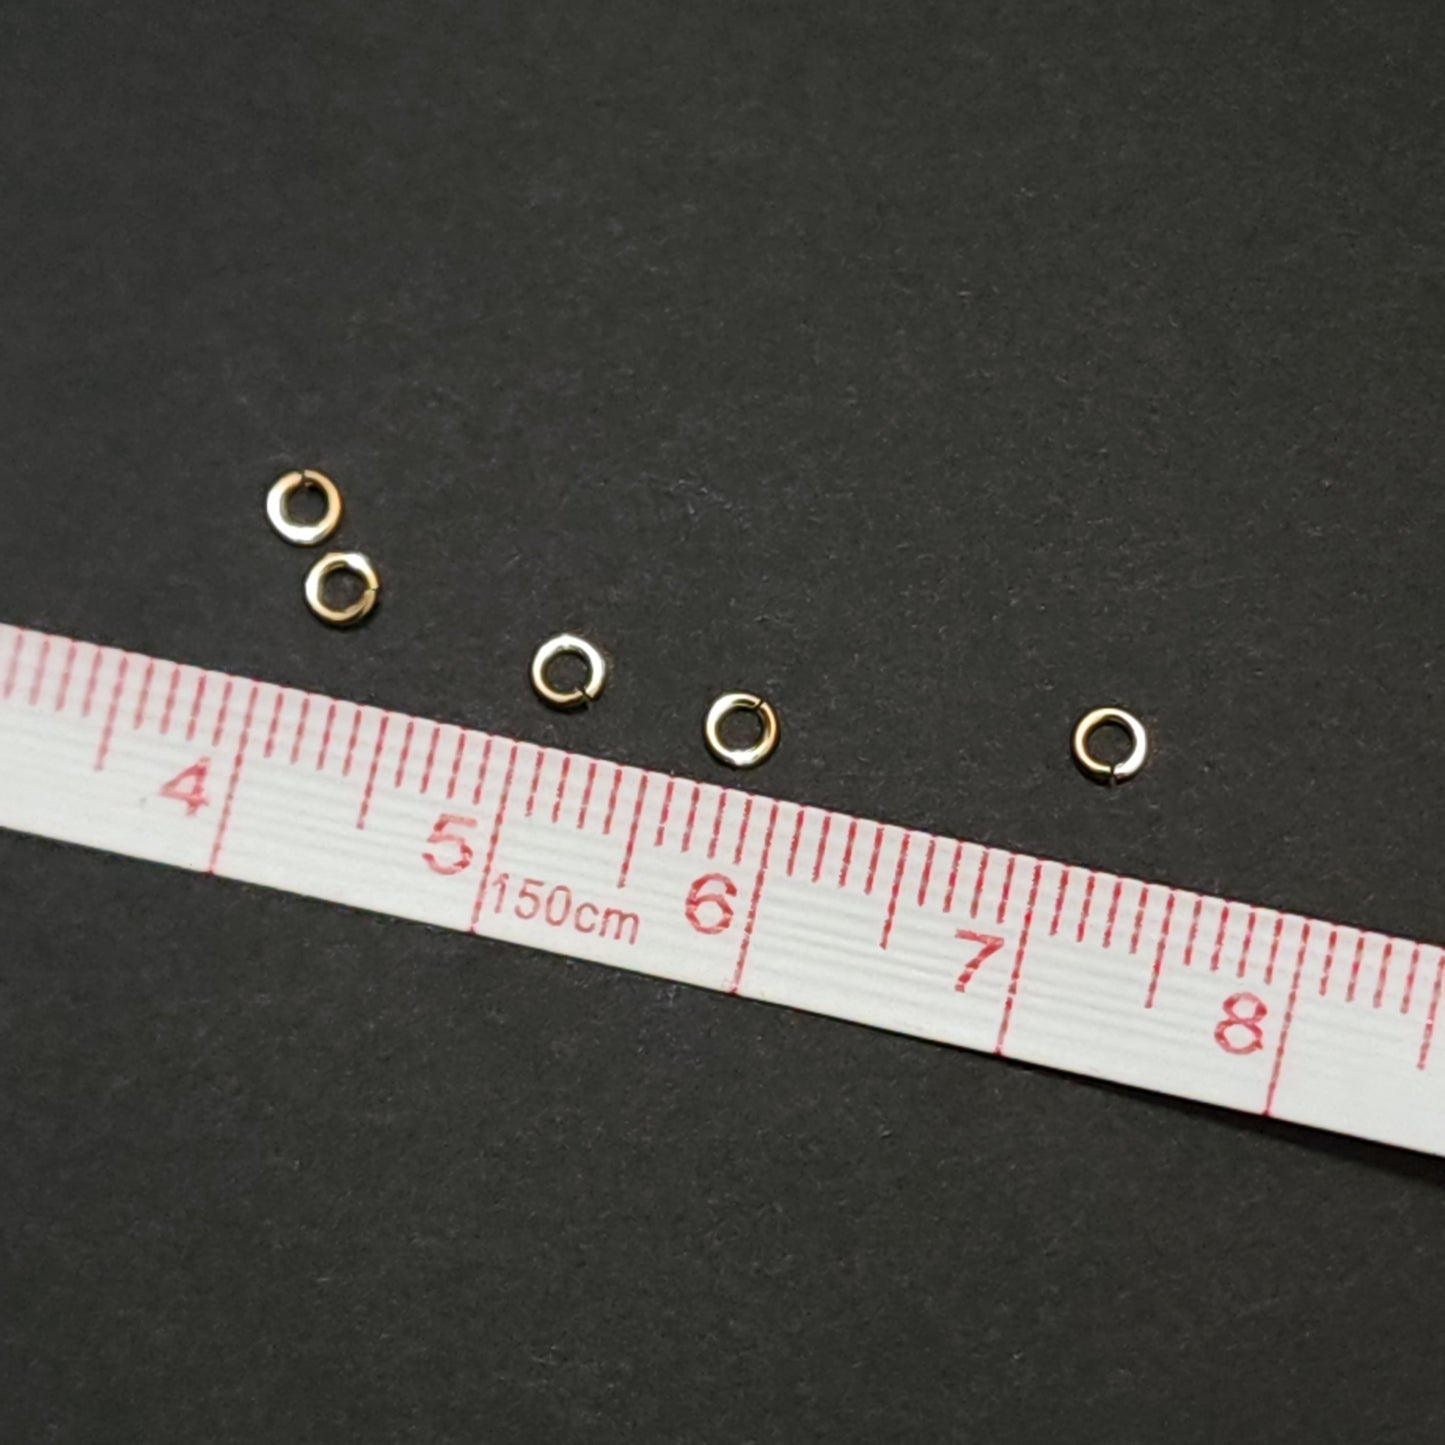 14/20 Gold Filled 3mm Jump Rings Jewelry Findings